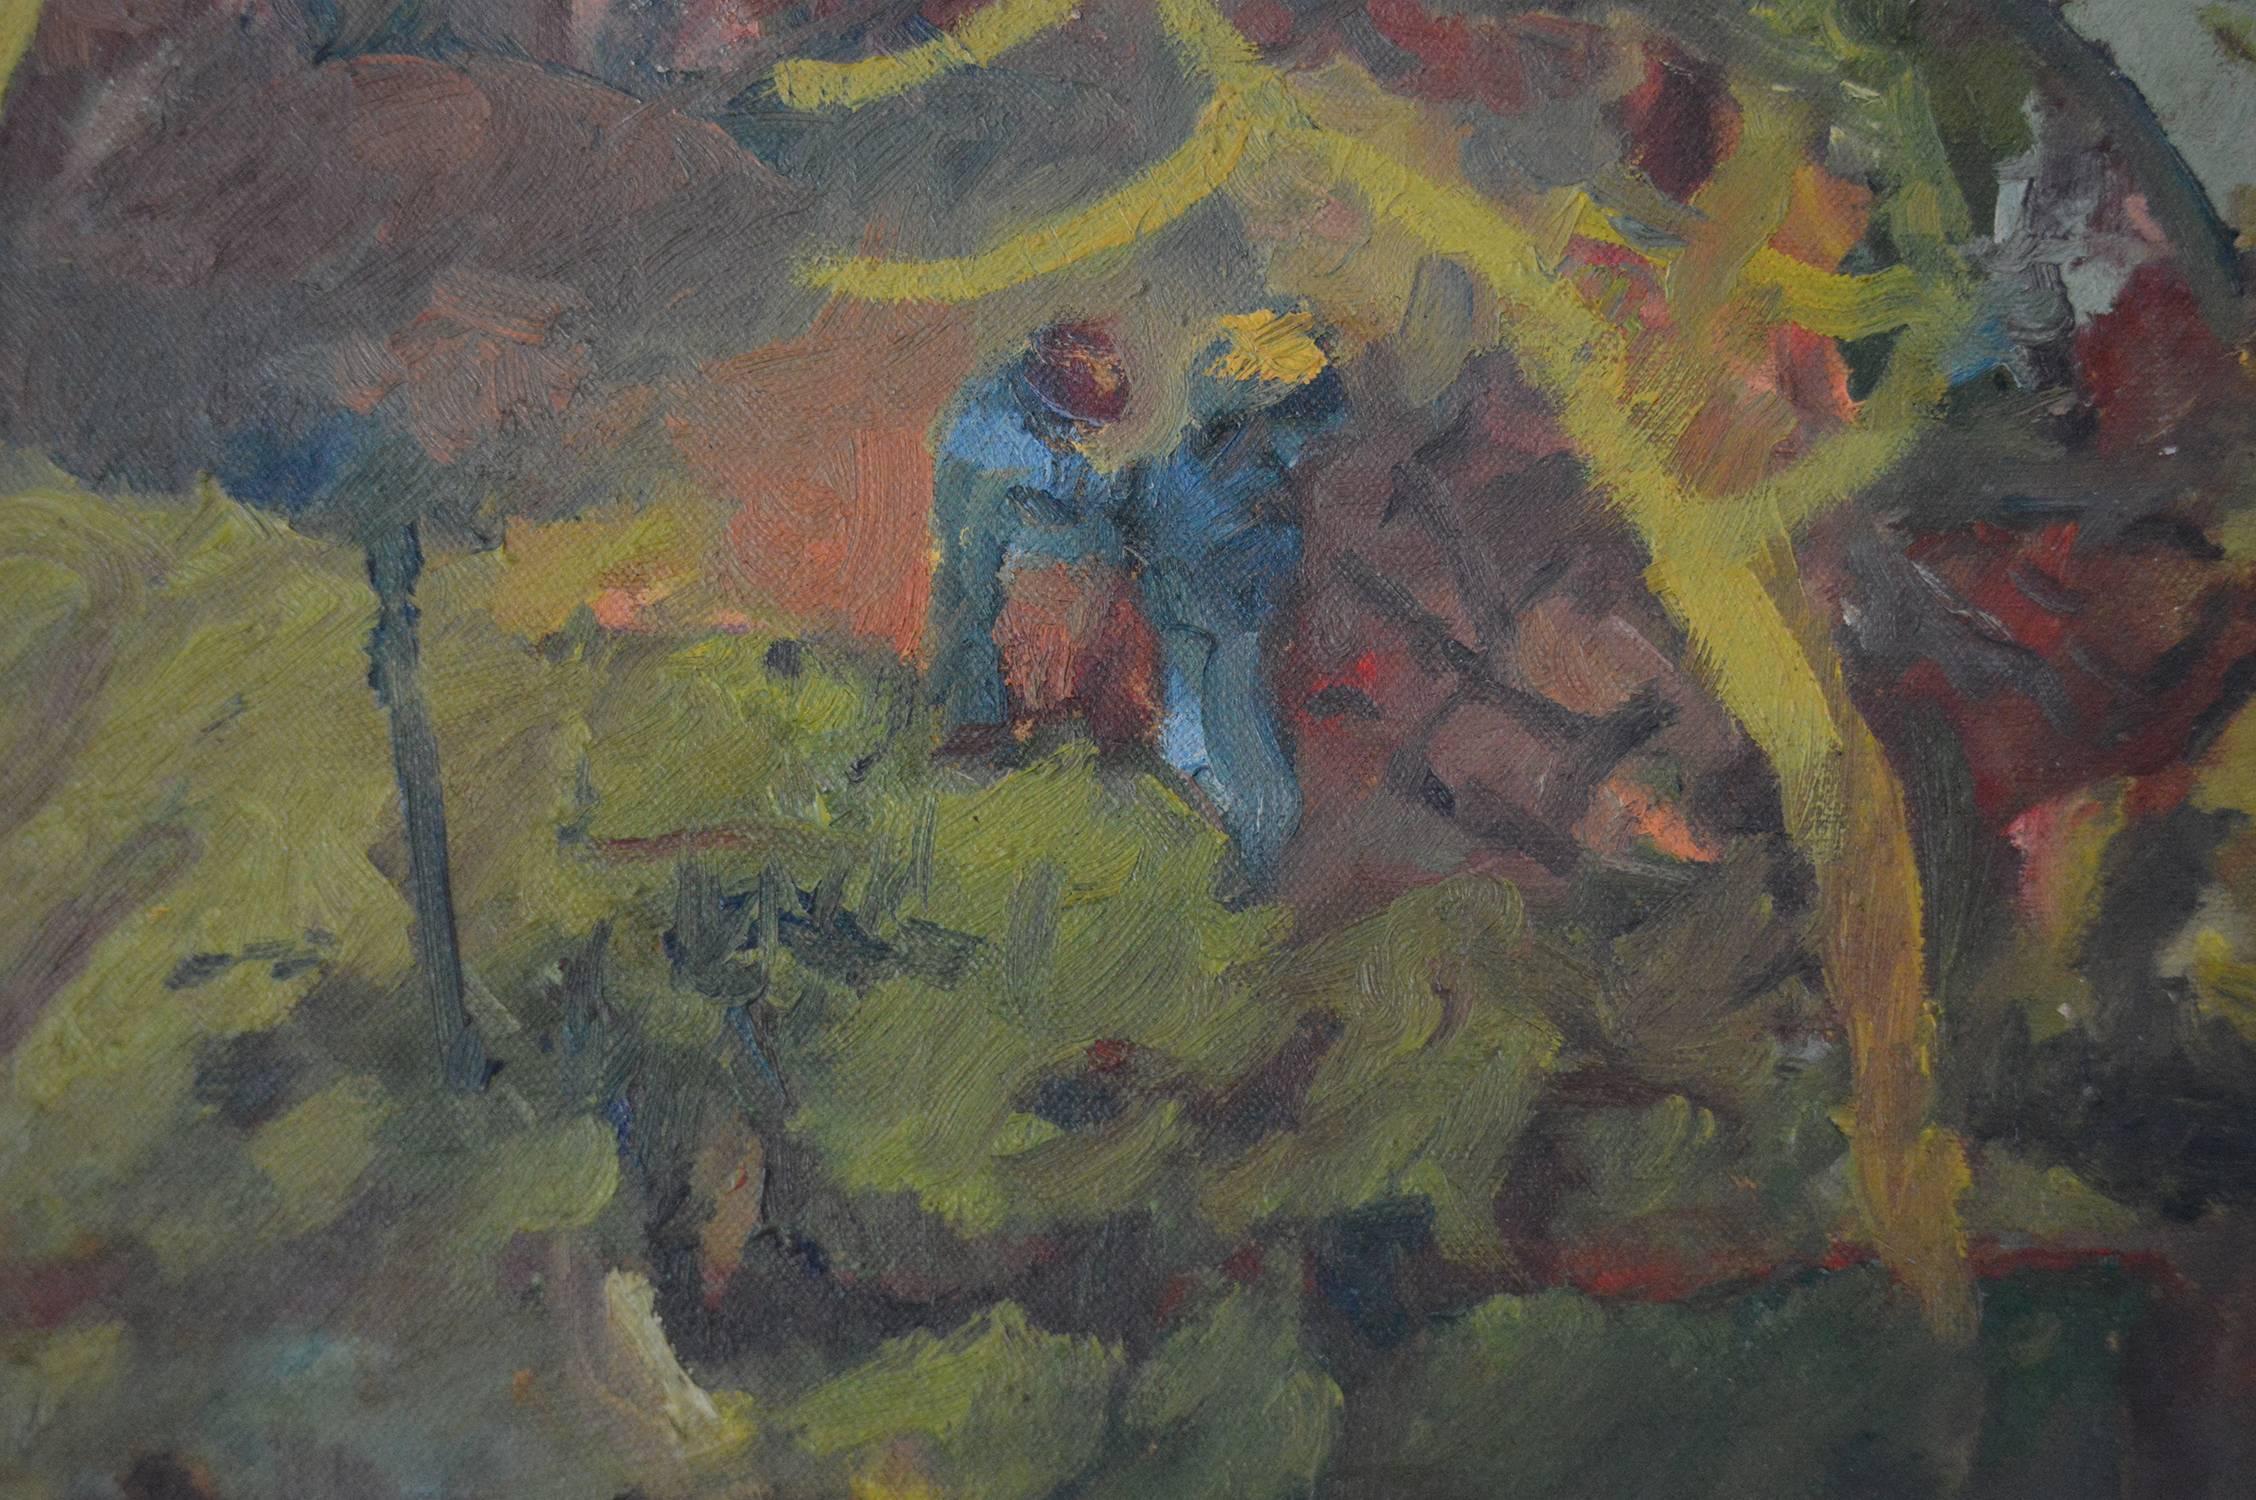 Other Figures in a Landscape, Tony Phillips, 1975